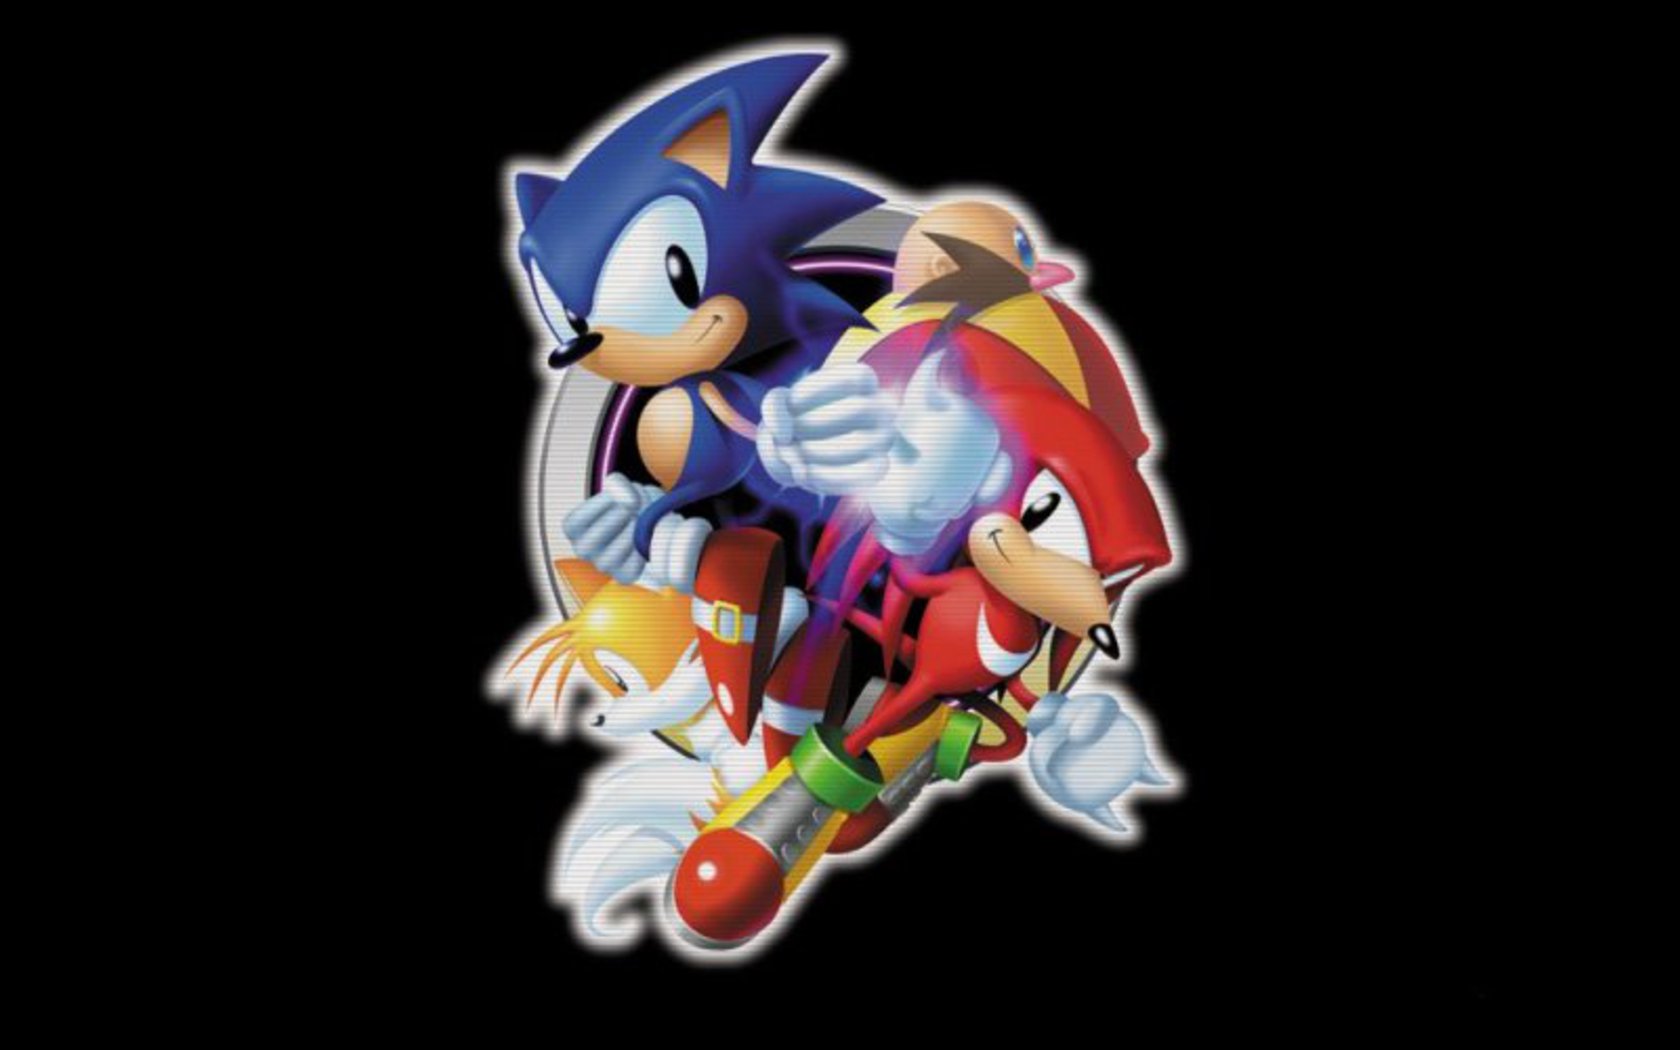 sonic the hedgehog 3, video game, classic knuckles, classic sonic, doctor eggman, knuckles the echidna, miles 'tails' prower, sonic the hedgehog, sonic